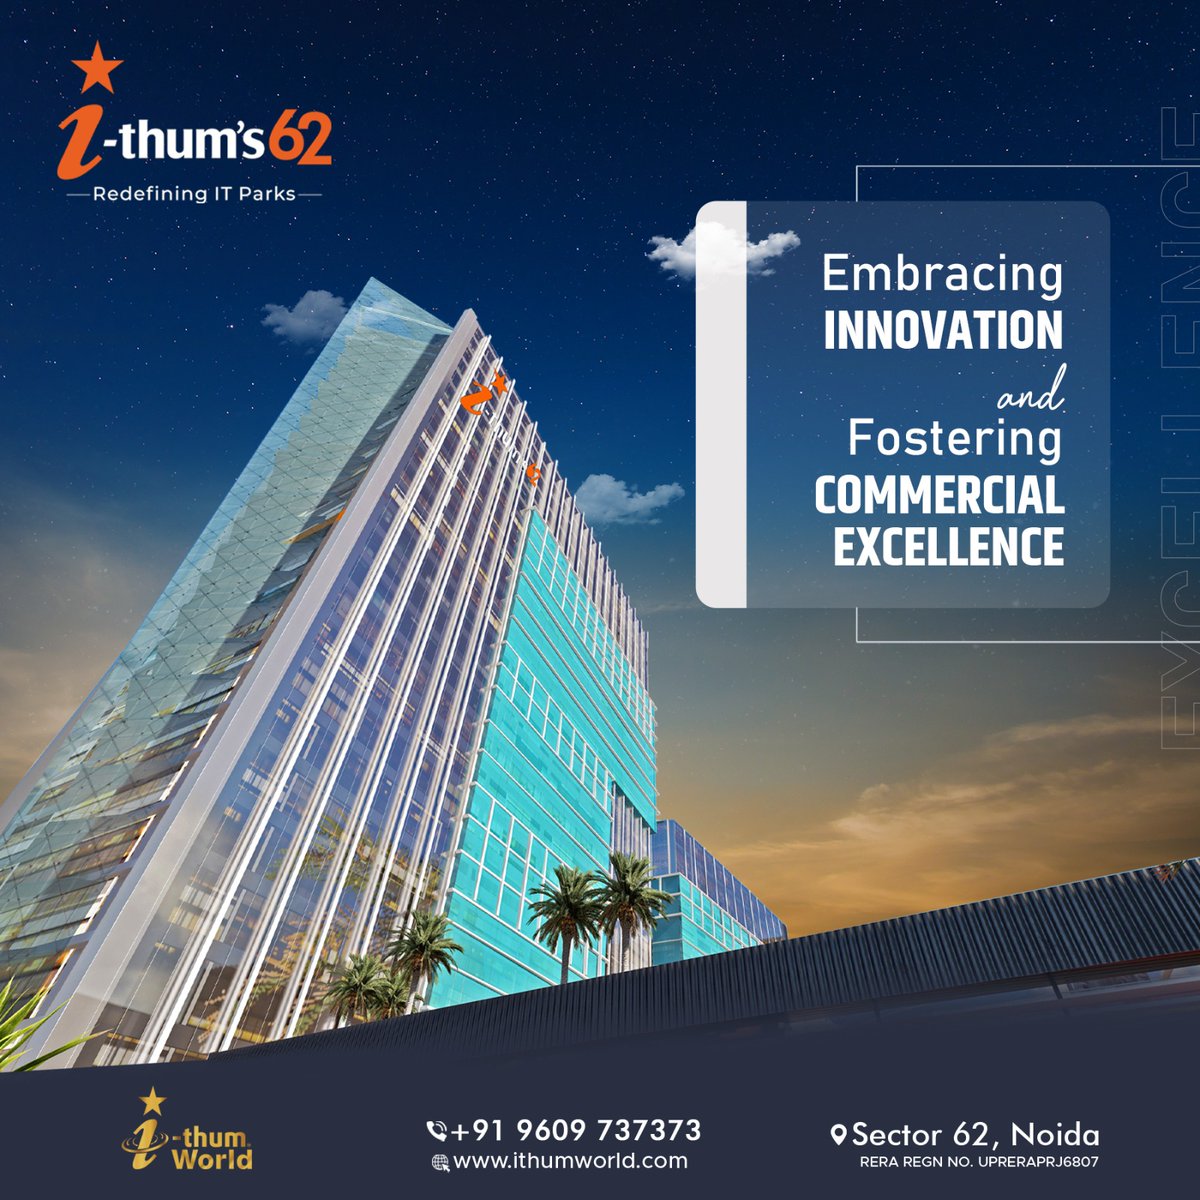 IThums 62 –Embracing Innovation and Fostering Commercial Excellence. Own your office at the most accessible location in Noida and witness a steep rise in your business or investment growth. For more info, call us at 9609737373.
.
#Ithums62 #ITPark #RealEstate #IthumWorld